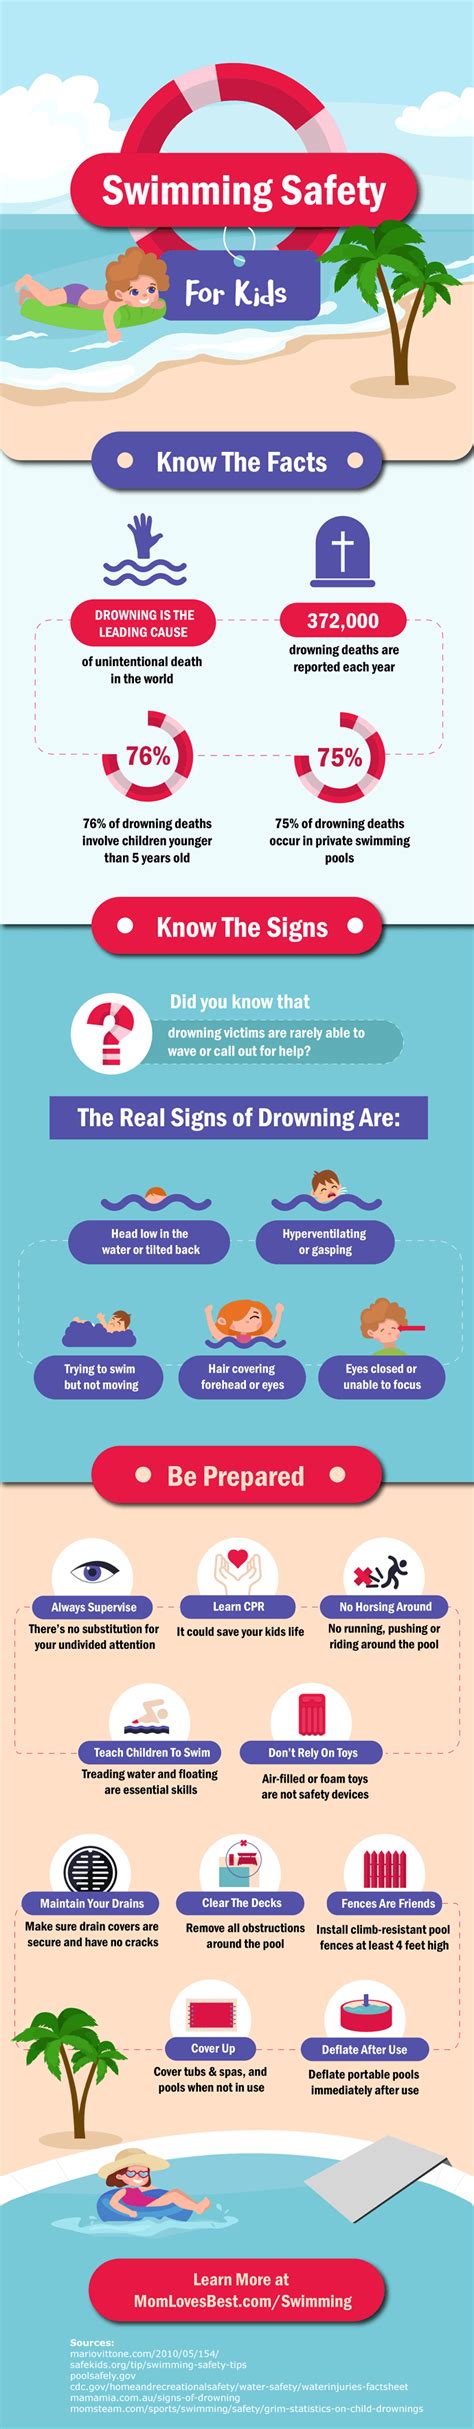 The Ultimate Guide To Swimming Safety For Kids With Infographic